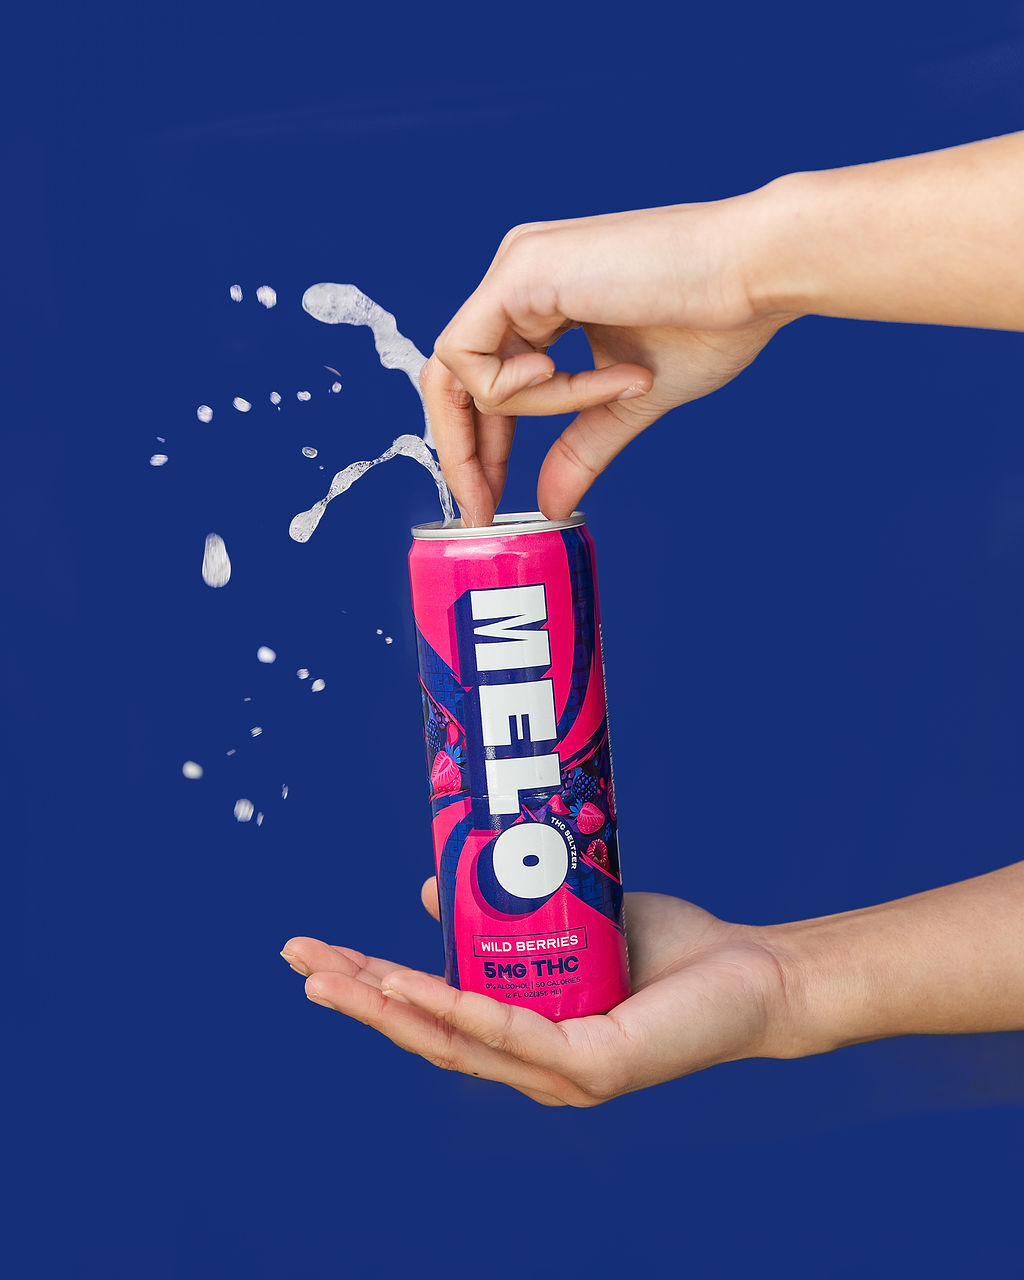 Melo THC Beverages Review: Grapefruit and Wild Berries Flavors